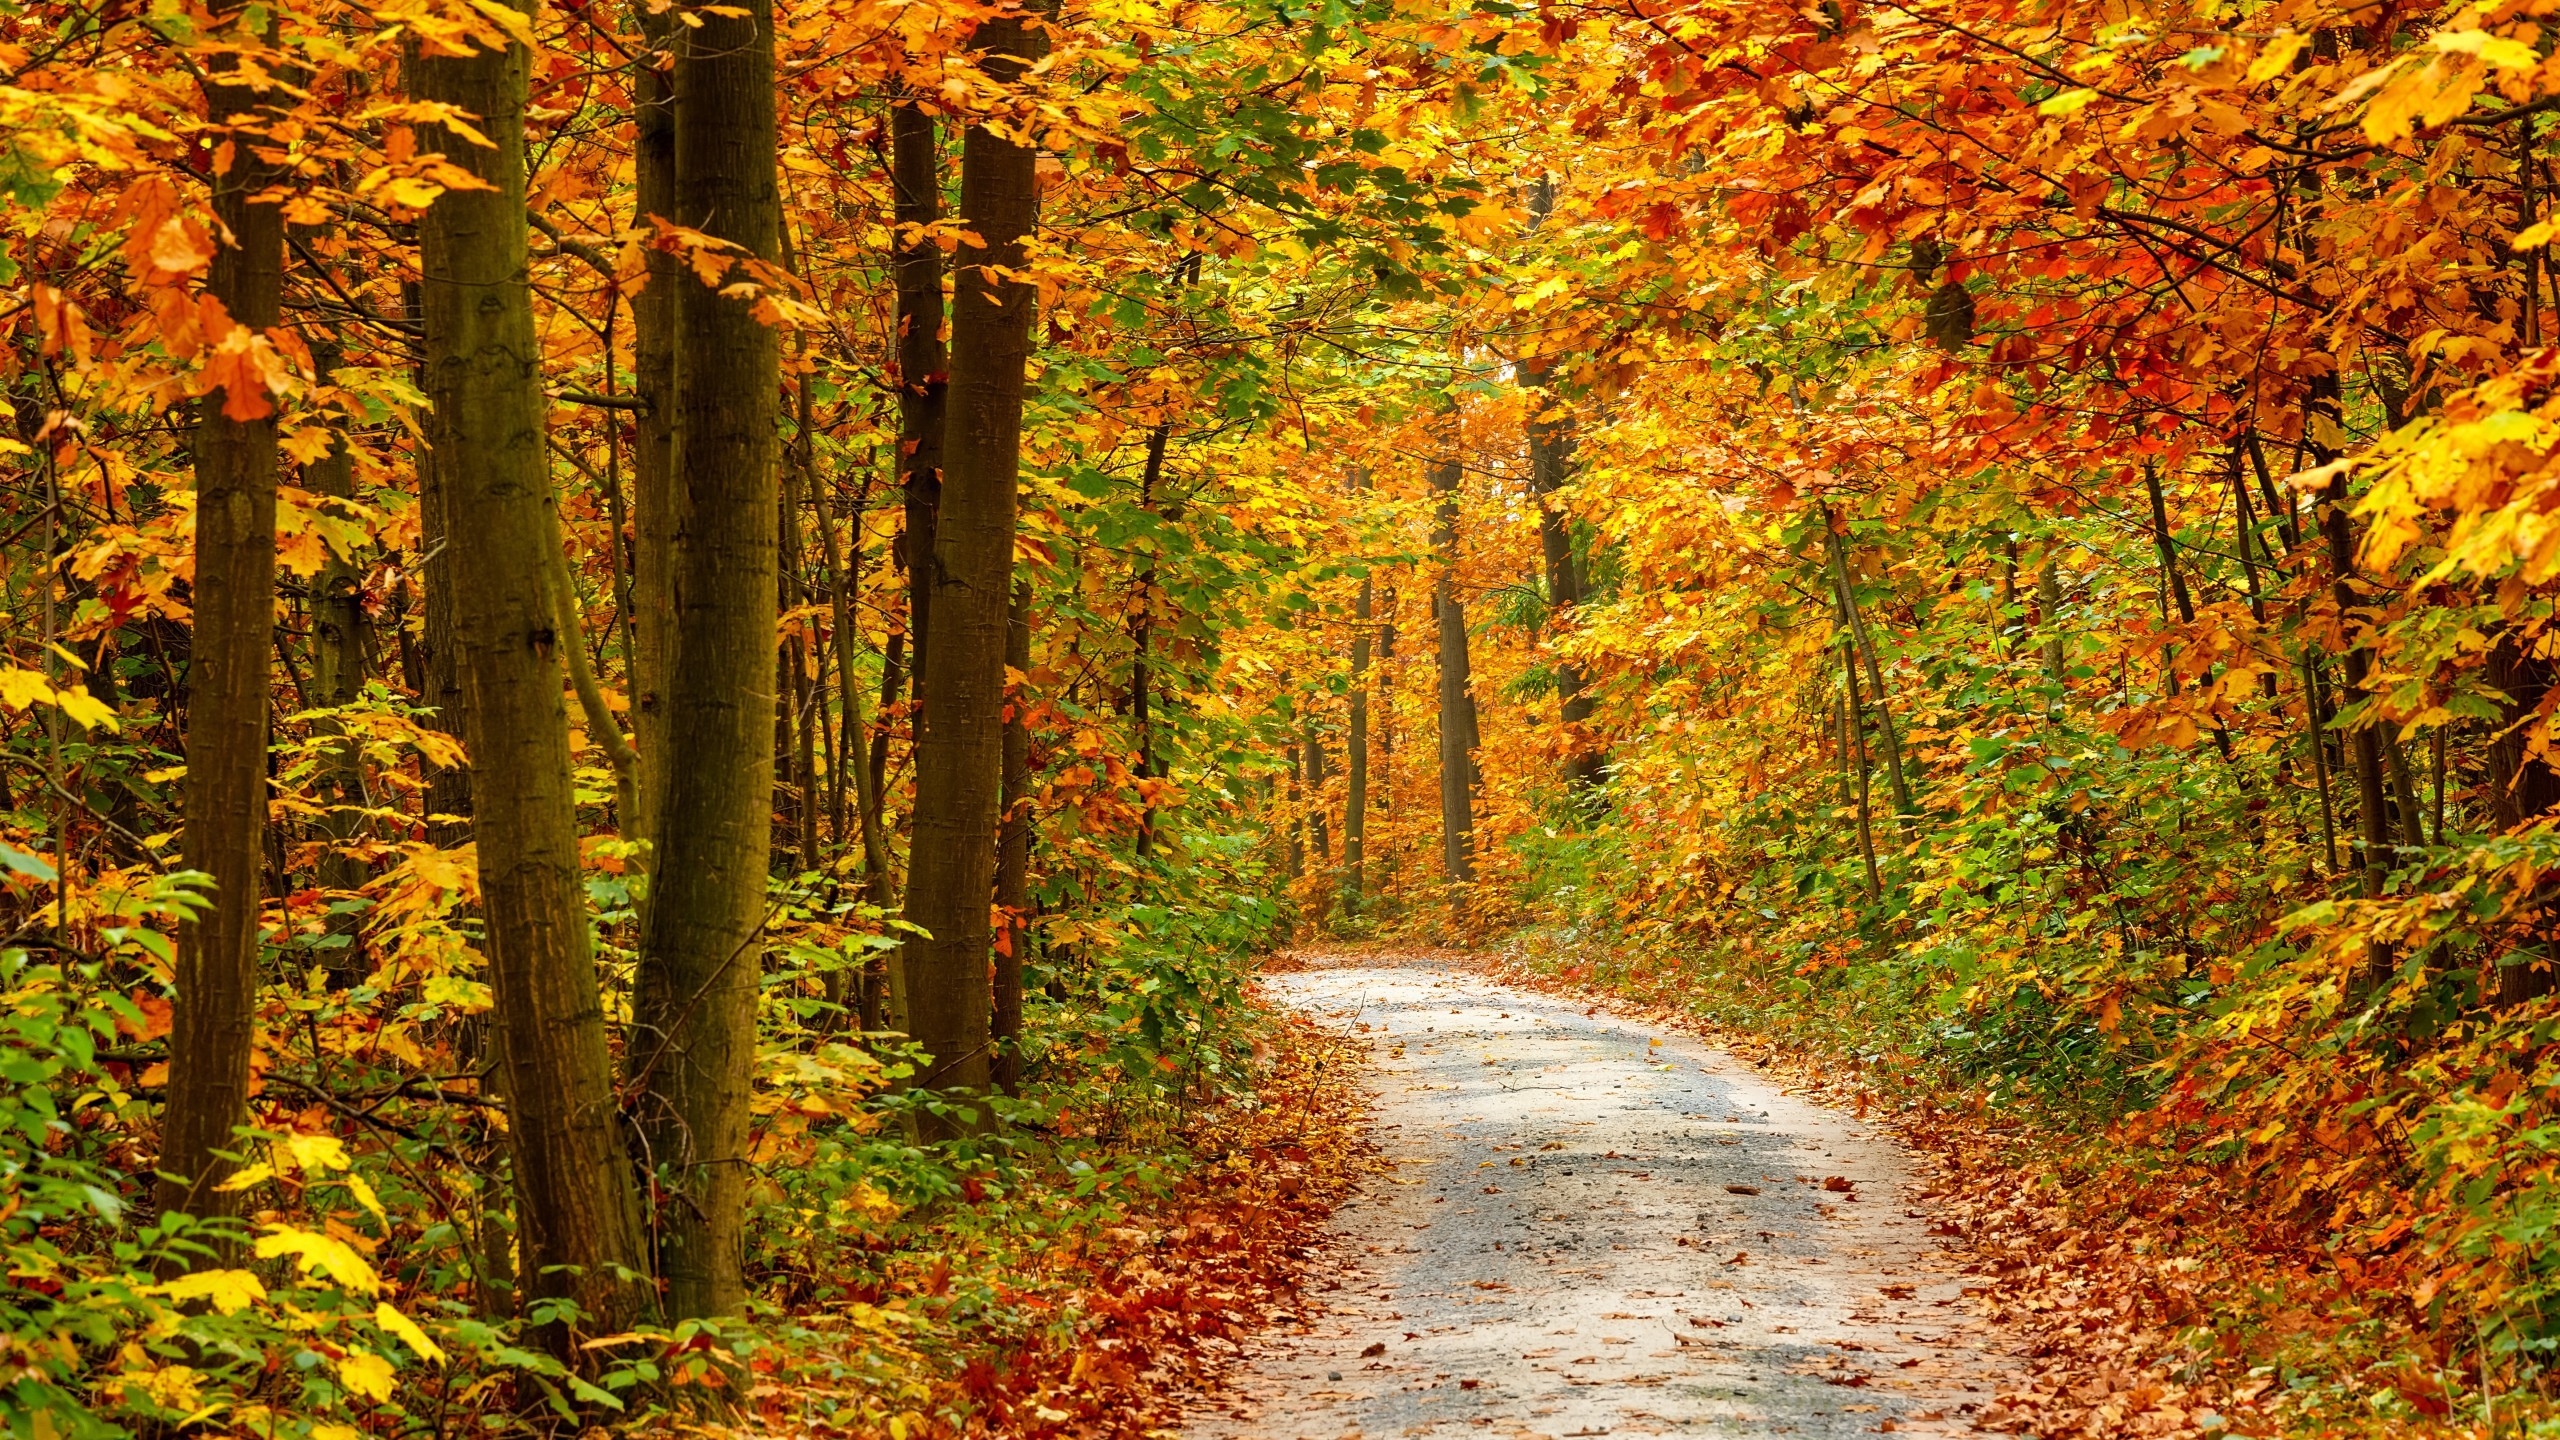 Autumn Forest Landscape Road for 2560x1440 HDTV resolution